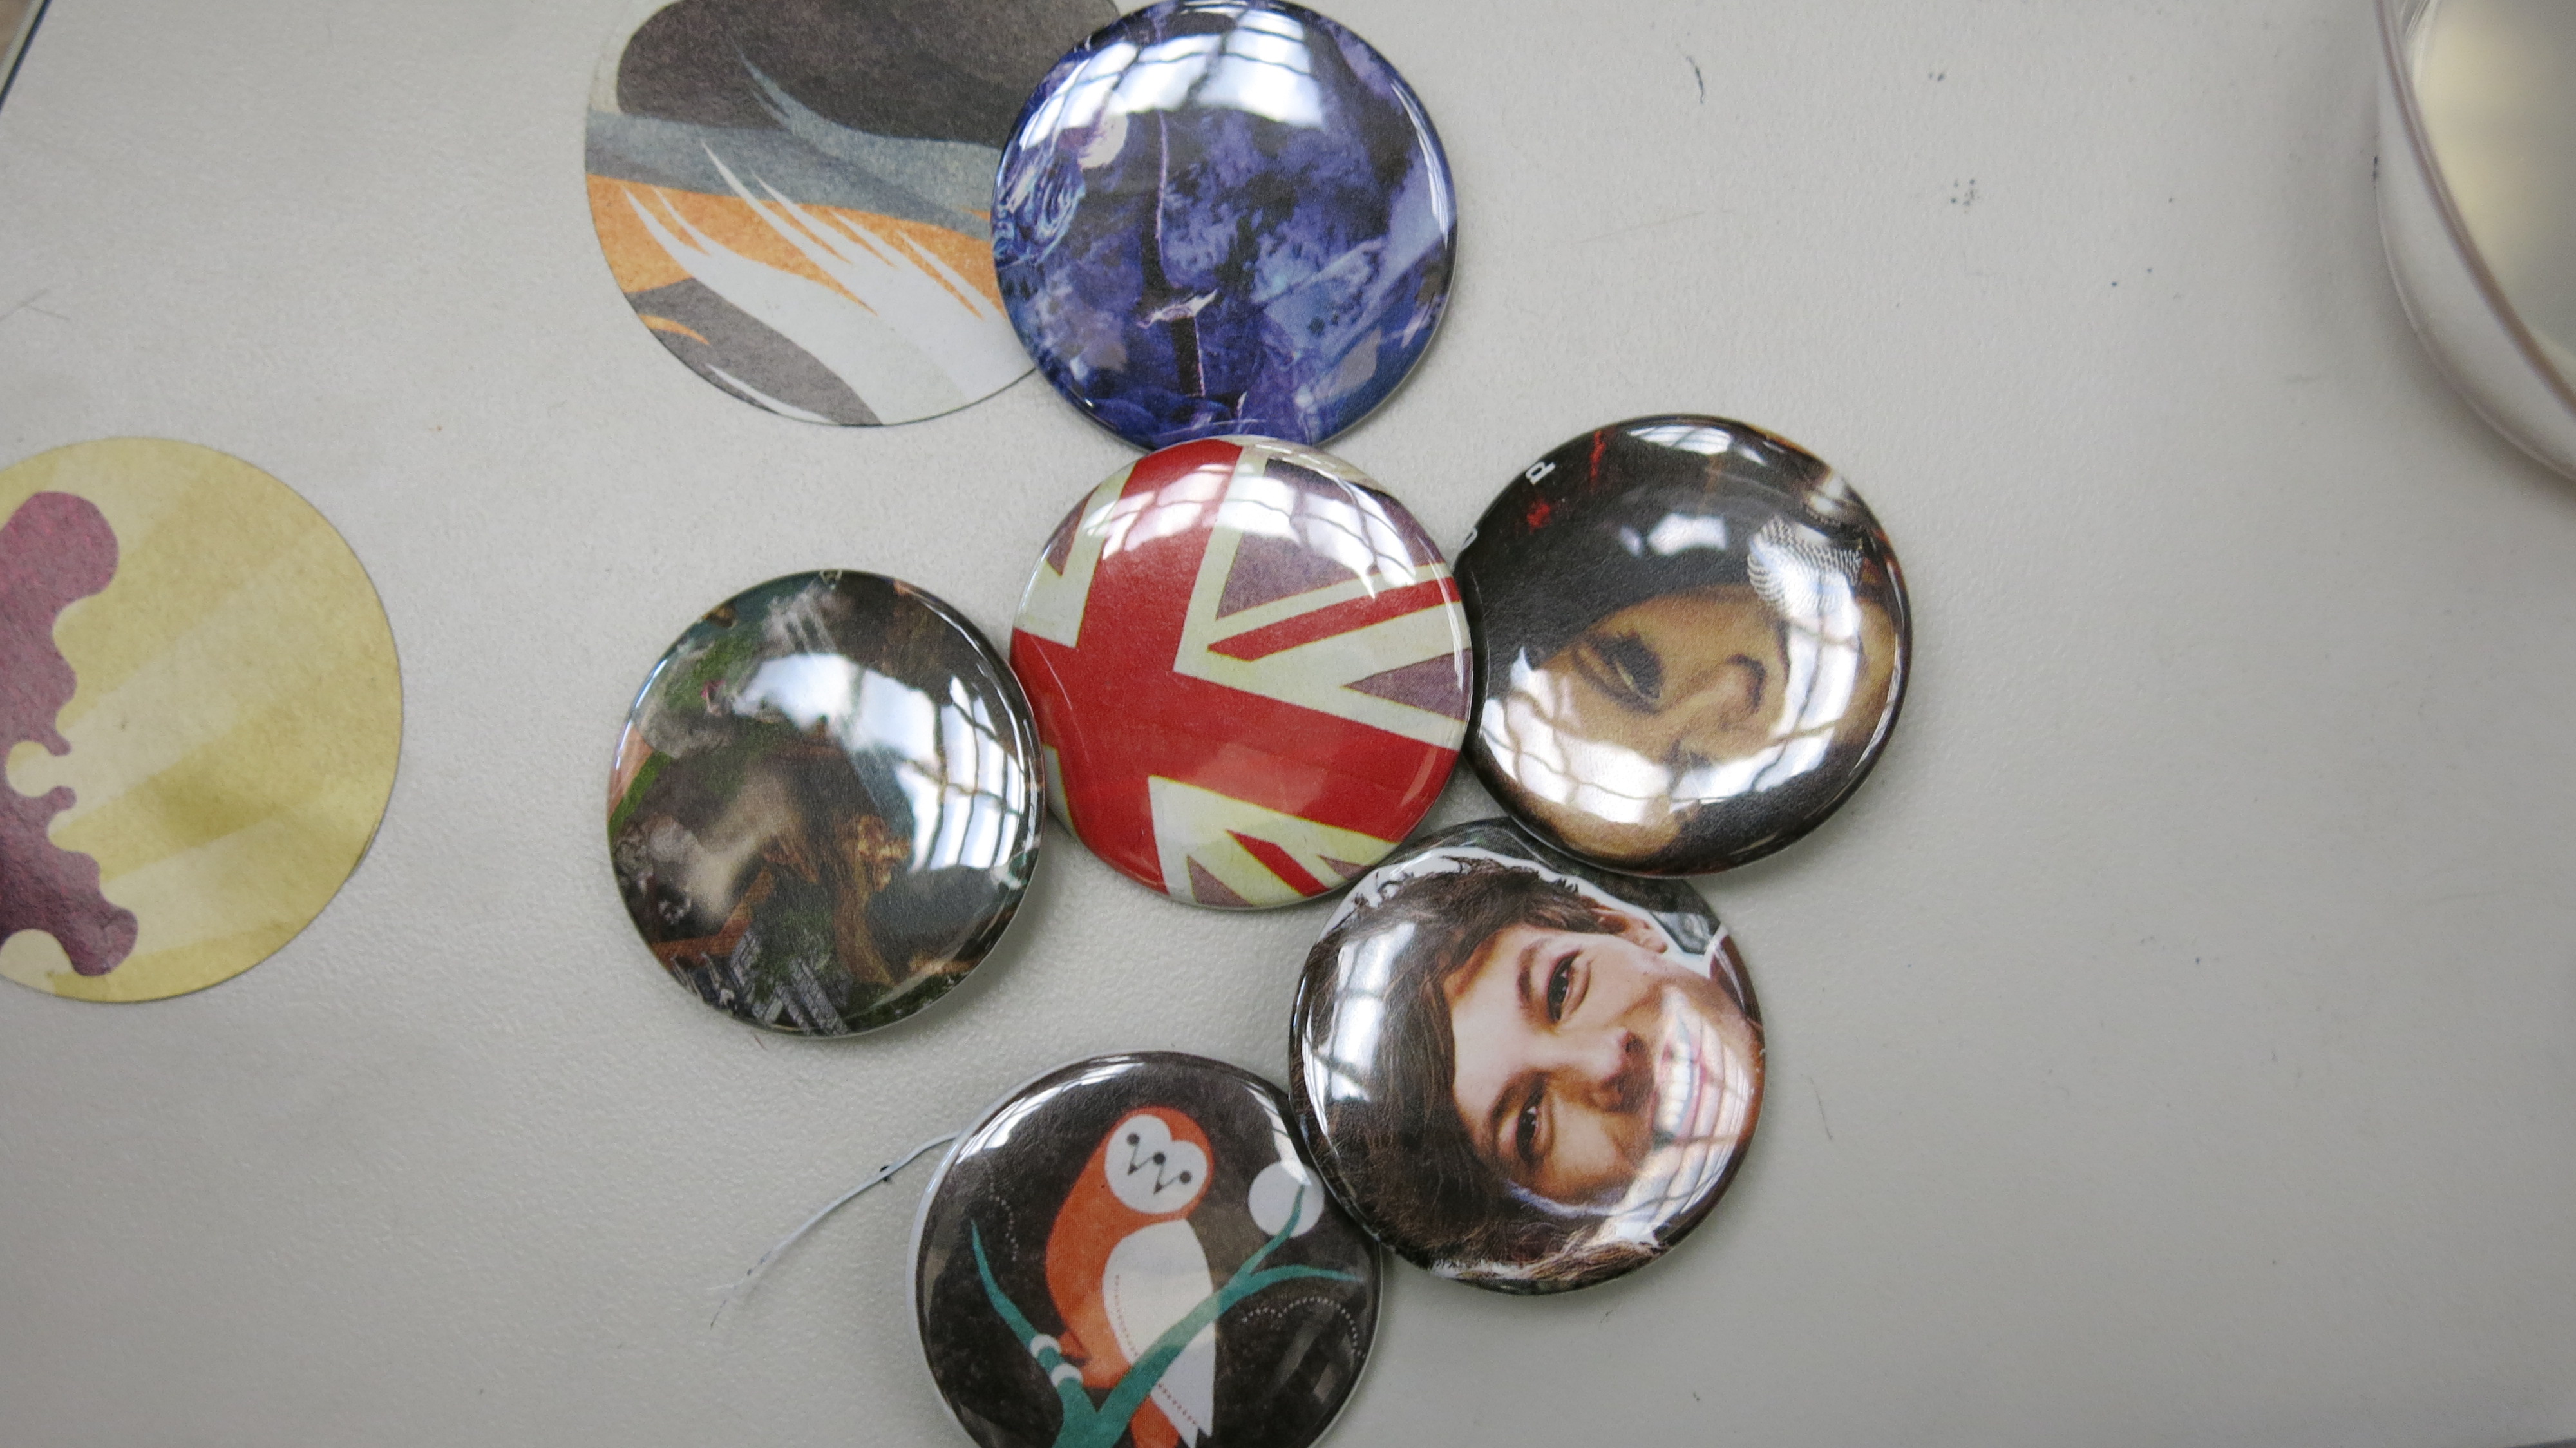 Some of the pins participants made.